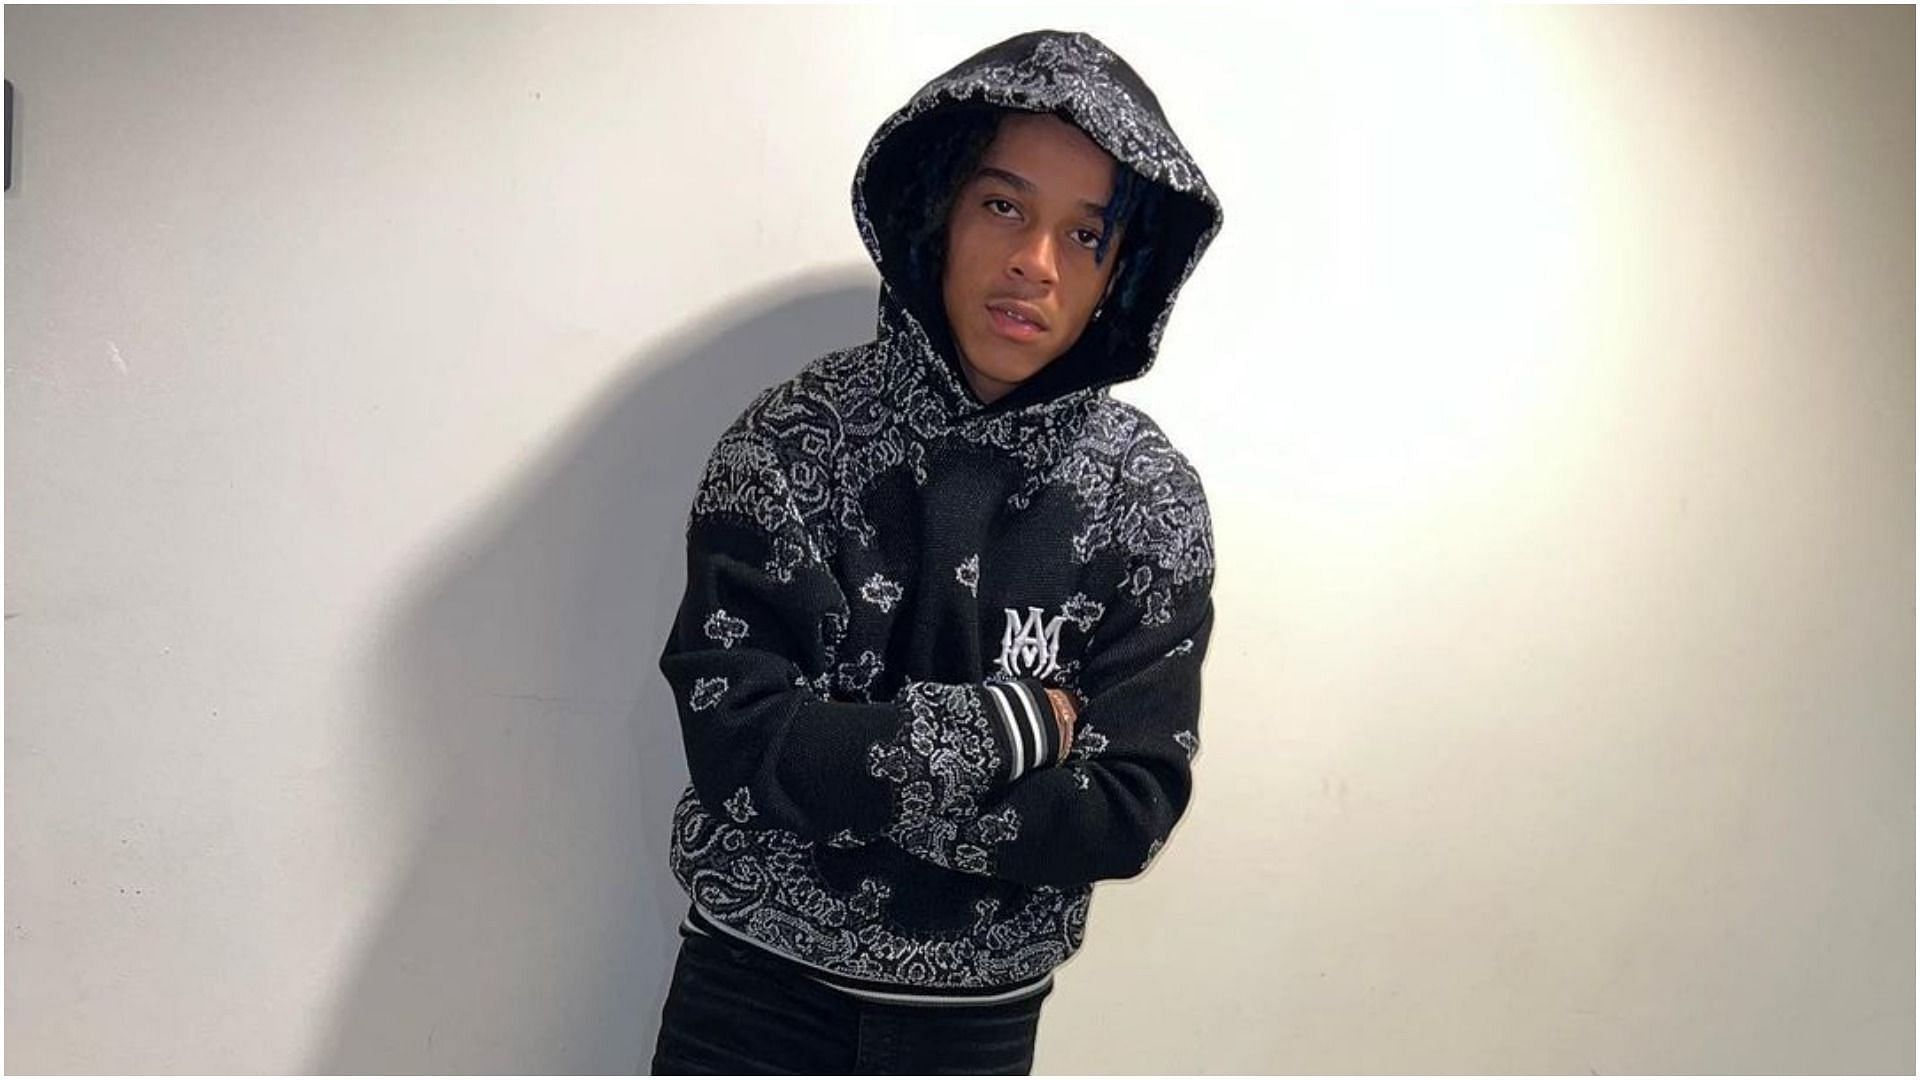 Who Is C Blu? 16 Year Old Rapper Charged With Shooting NYPD Cop Walks Free On Bond